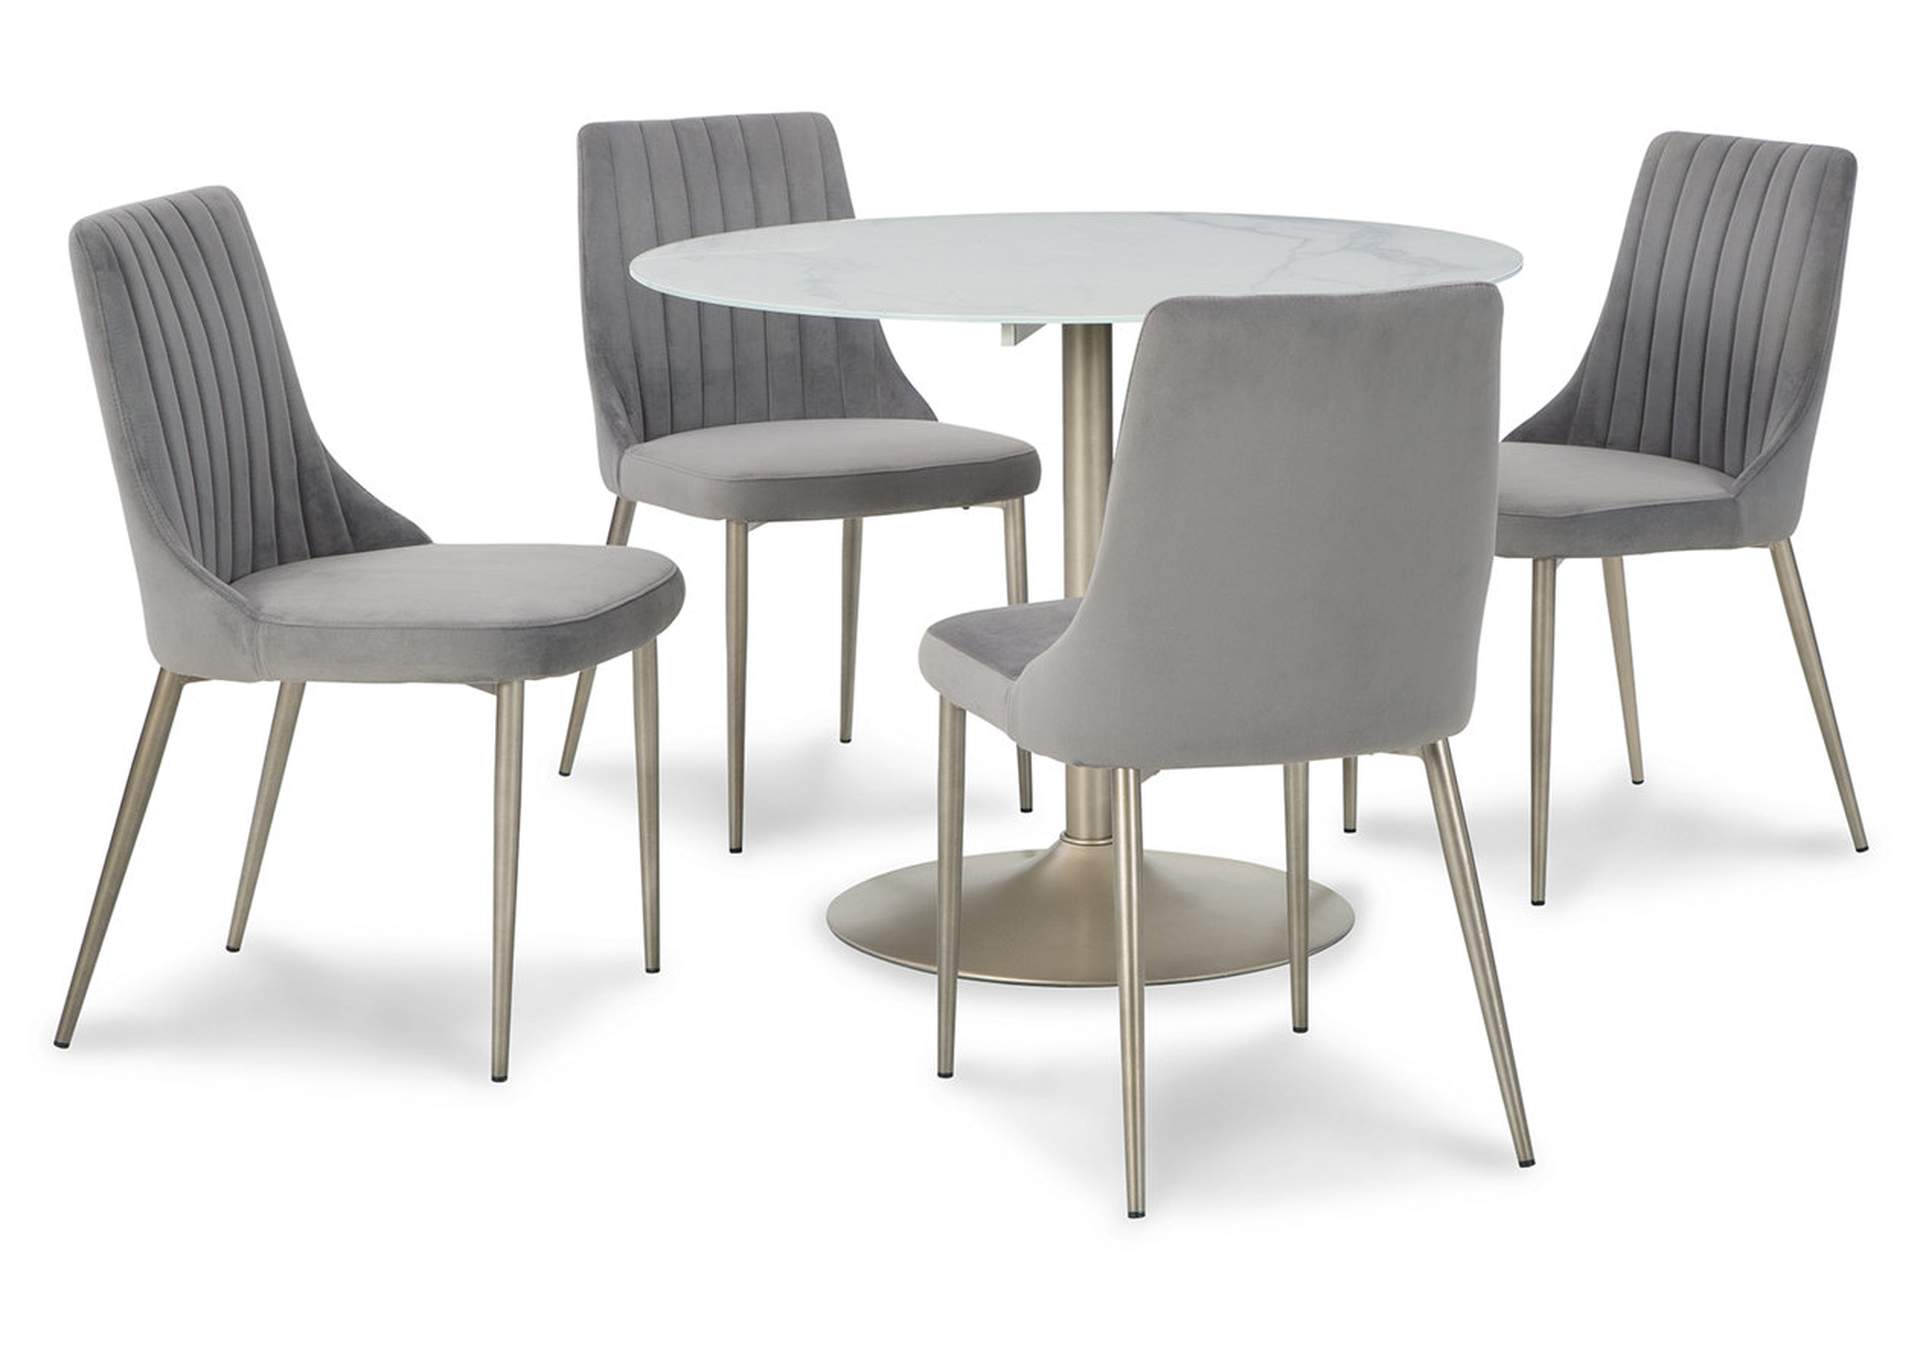 Barchoni Dining Table and 4 Chairs,Signature Design By Ashley